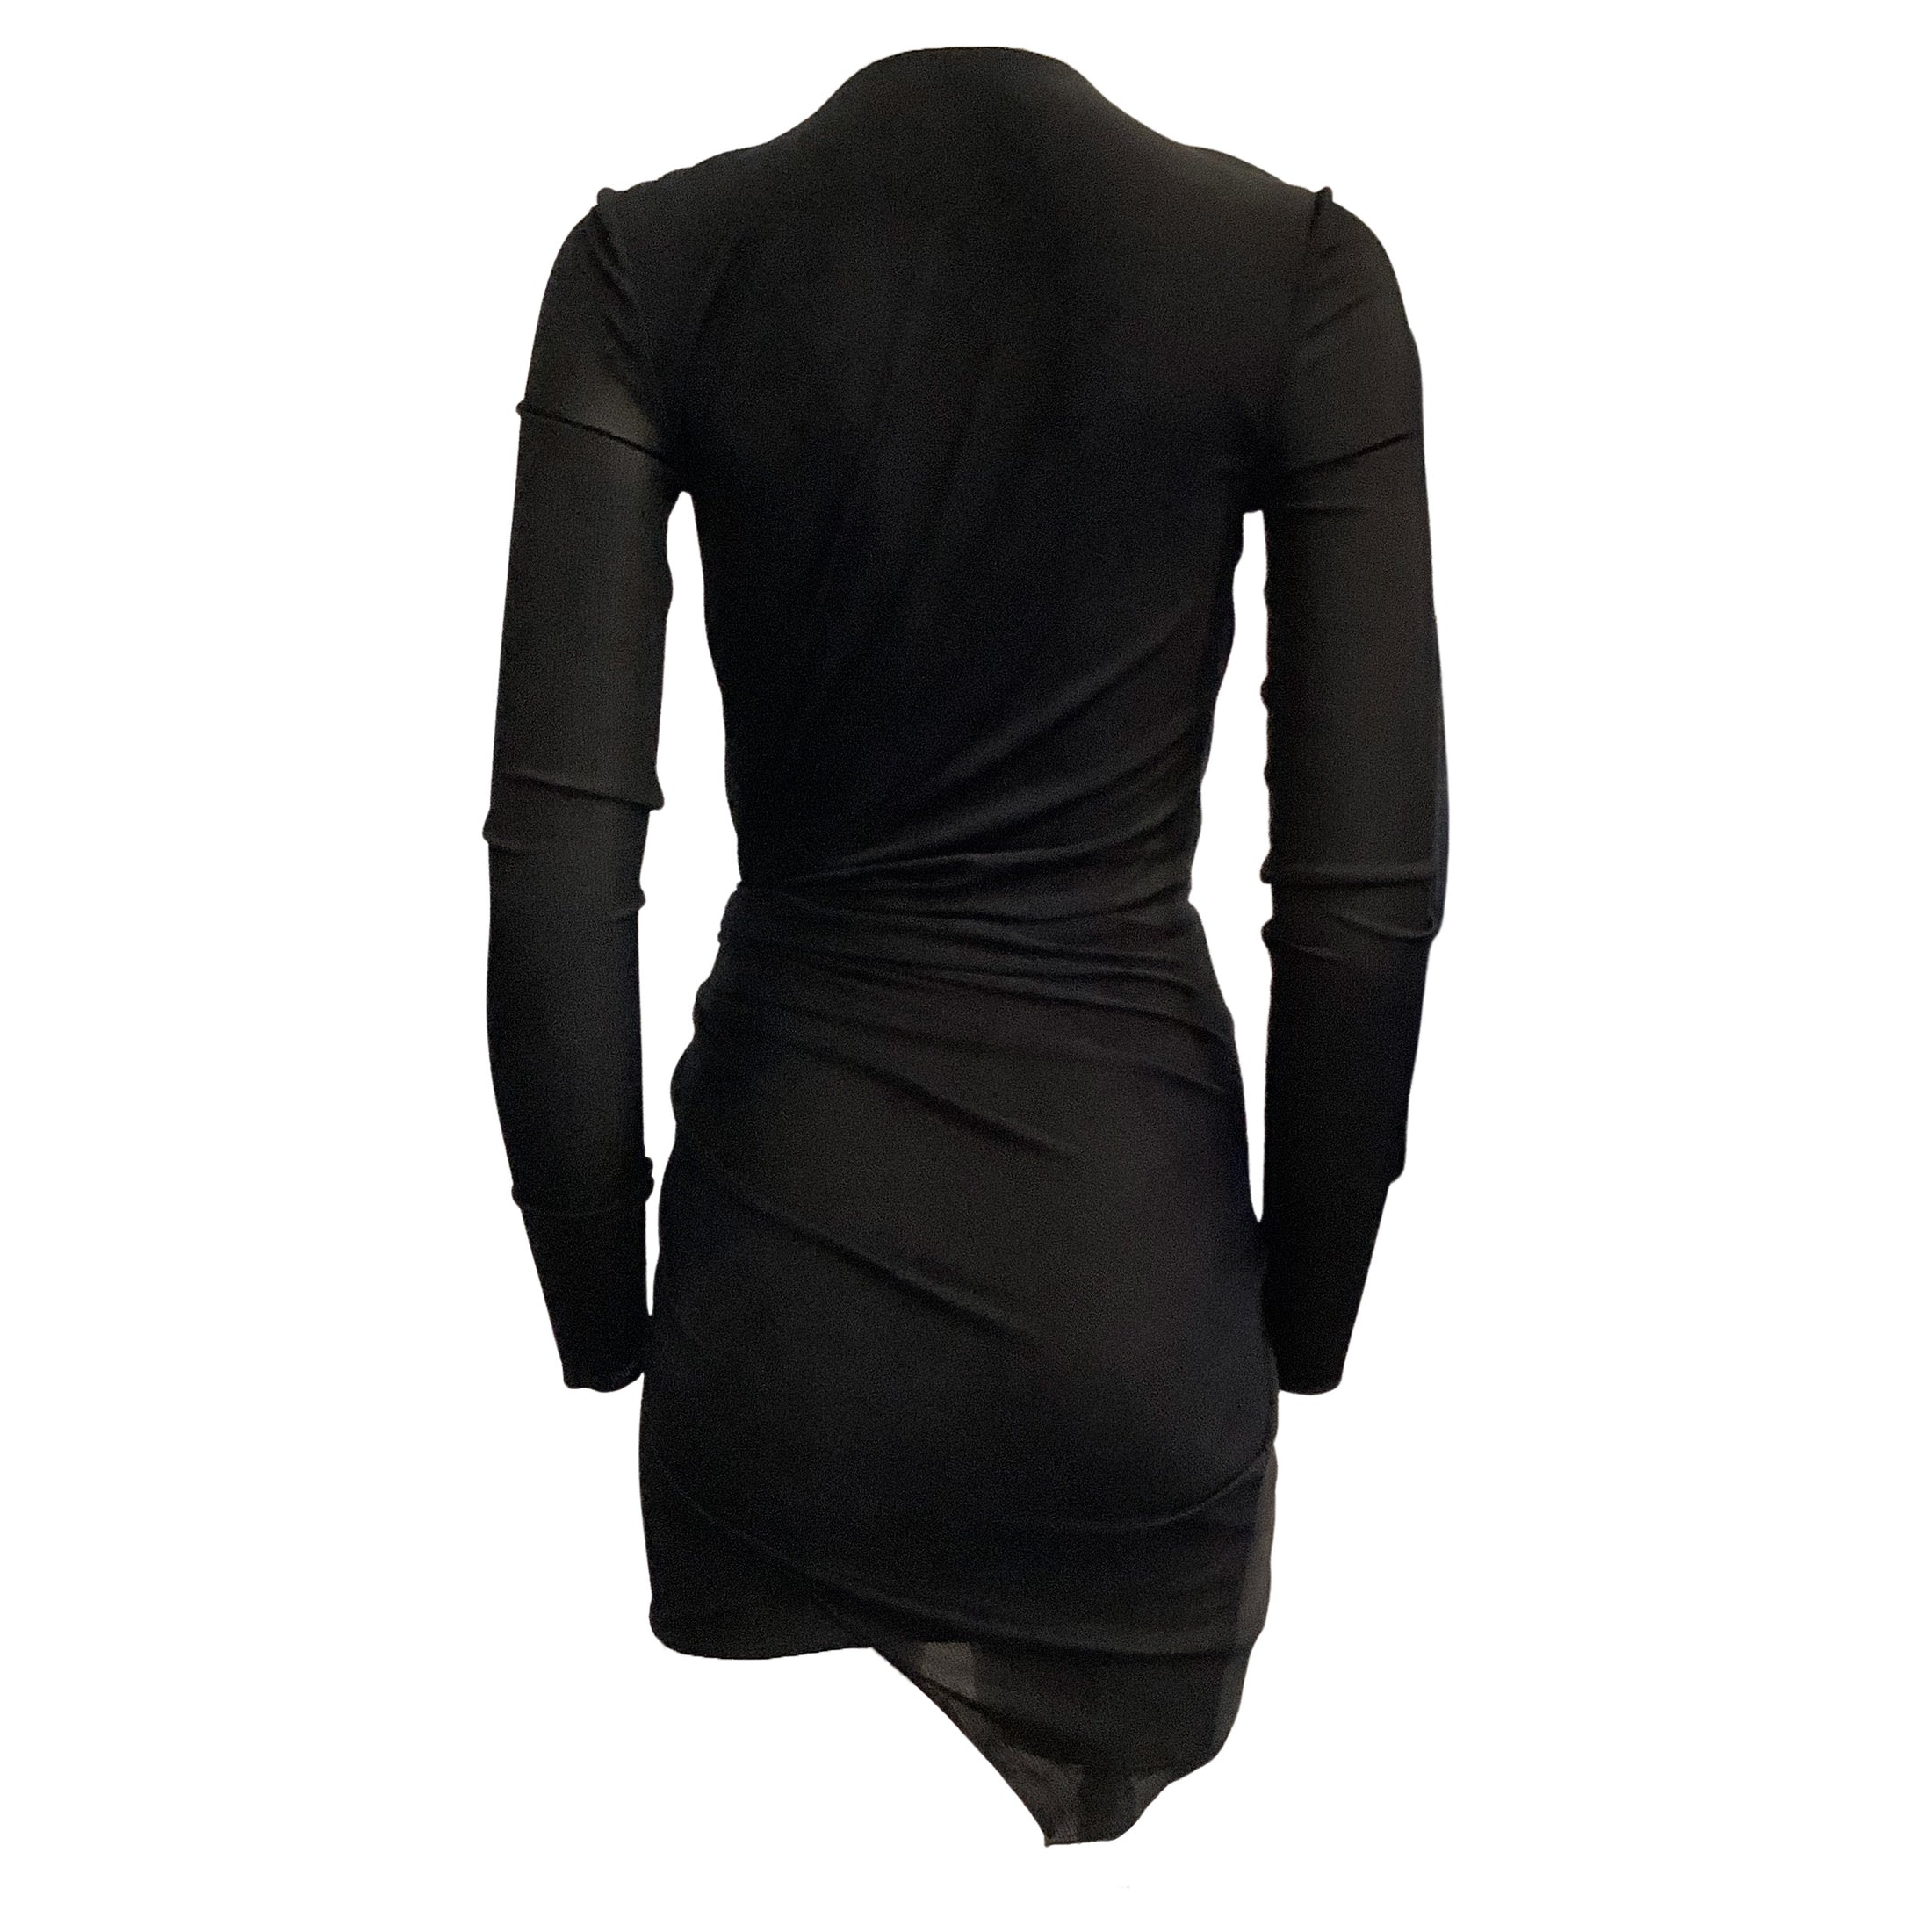 Alexandre Vauthier Black Rib Knit Ruched Deep V Night Out Dress